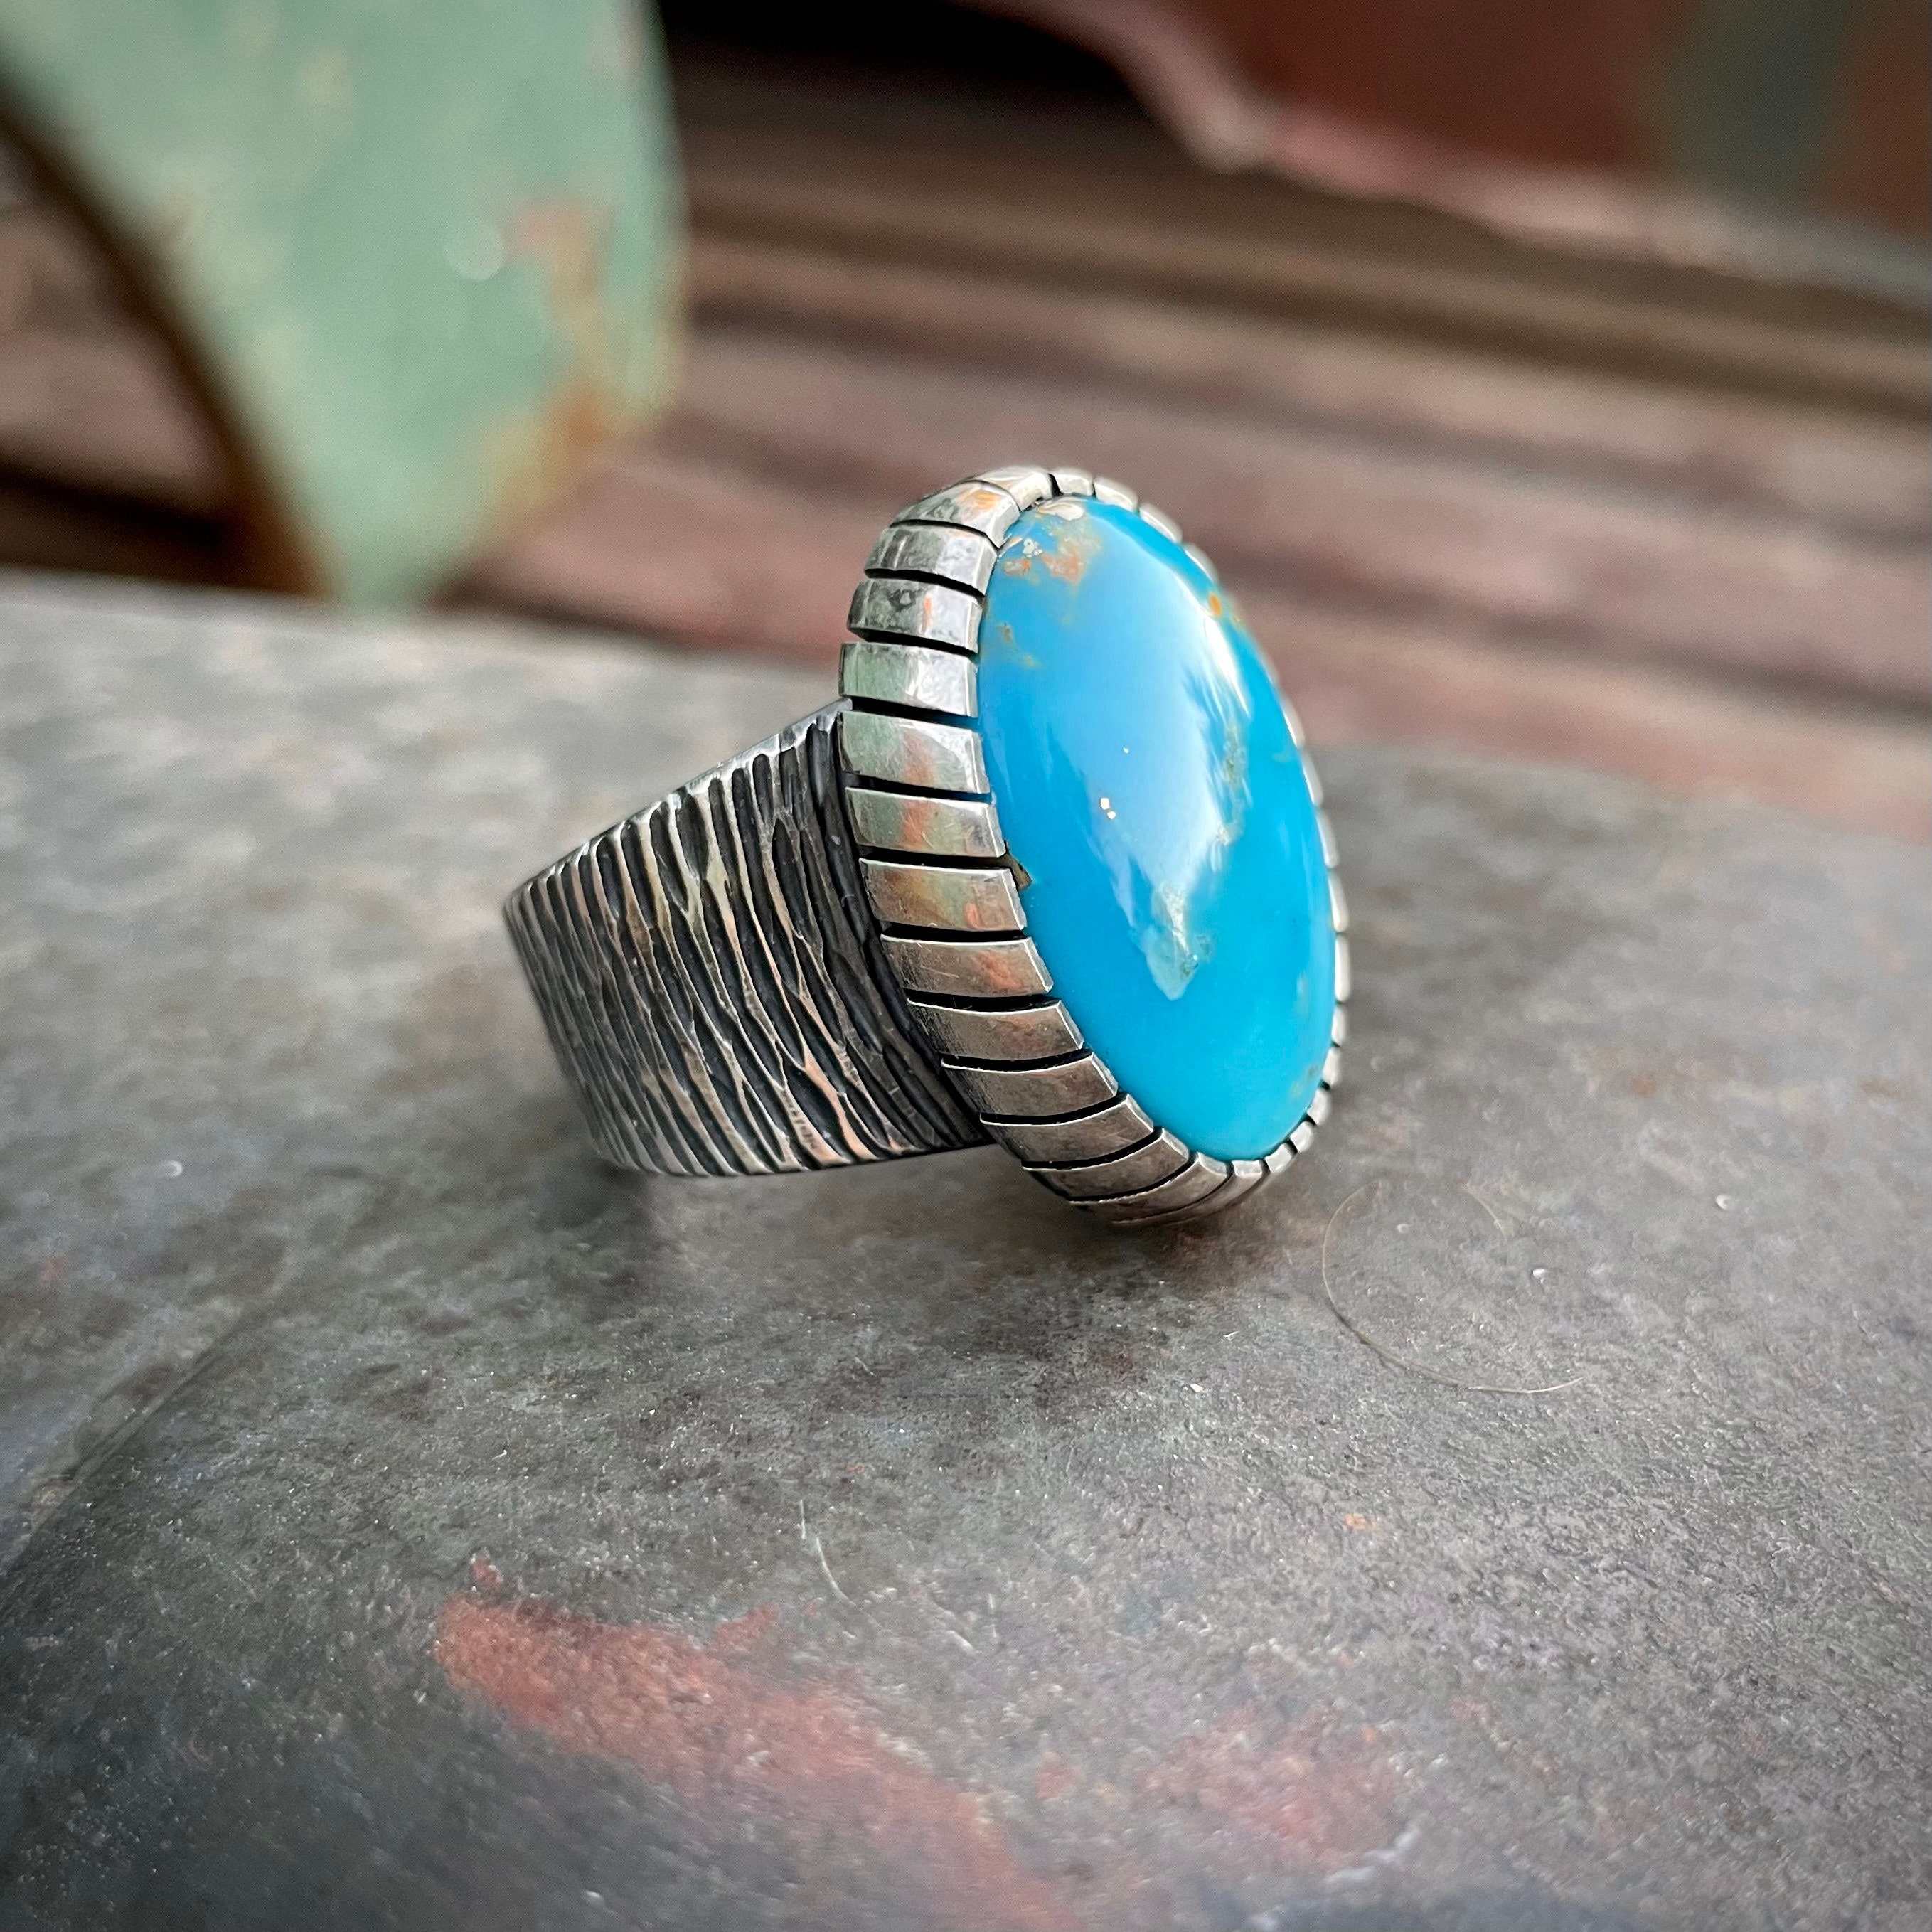 Men's Vintage Turquoise Ring, Navajo Rings, Real Turquoise Signet Ring,  Large Sterling Silver Square Signet Ring, Boho Turquoise Stone Ring - Etsy